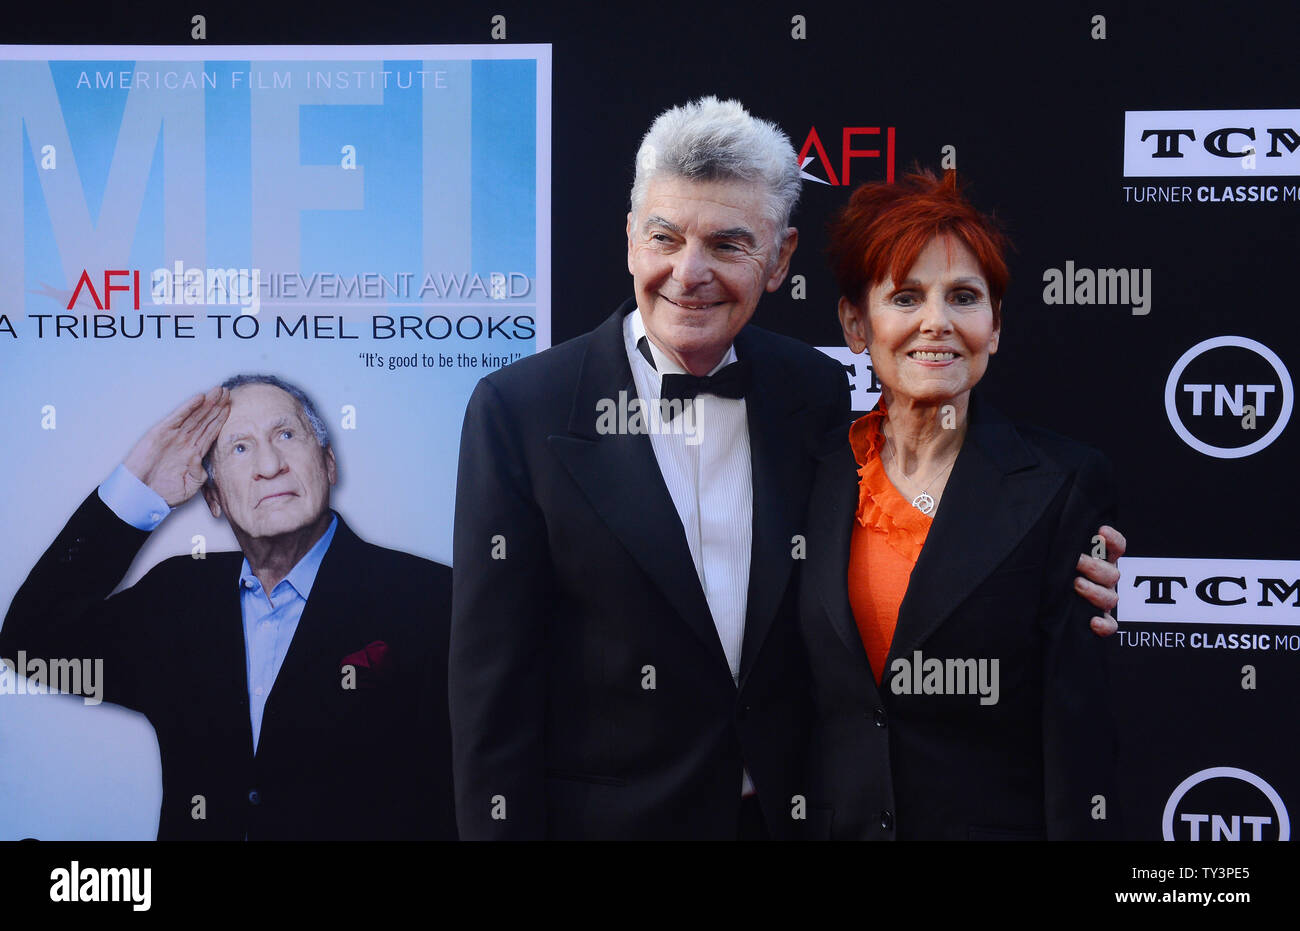 Actor Richard Benjamin and his wife, actress Paula Prentiss attend the 41st AFI Life Achievement Award tribute to director Mel Brooks at the Dolby Theatre in the Hollywood section of Los Angeles on June 6, 2013.  UPI/Jim Ruymen Stock Photo